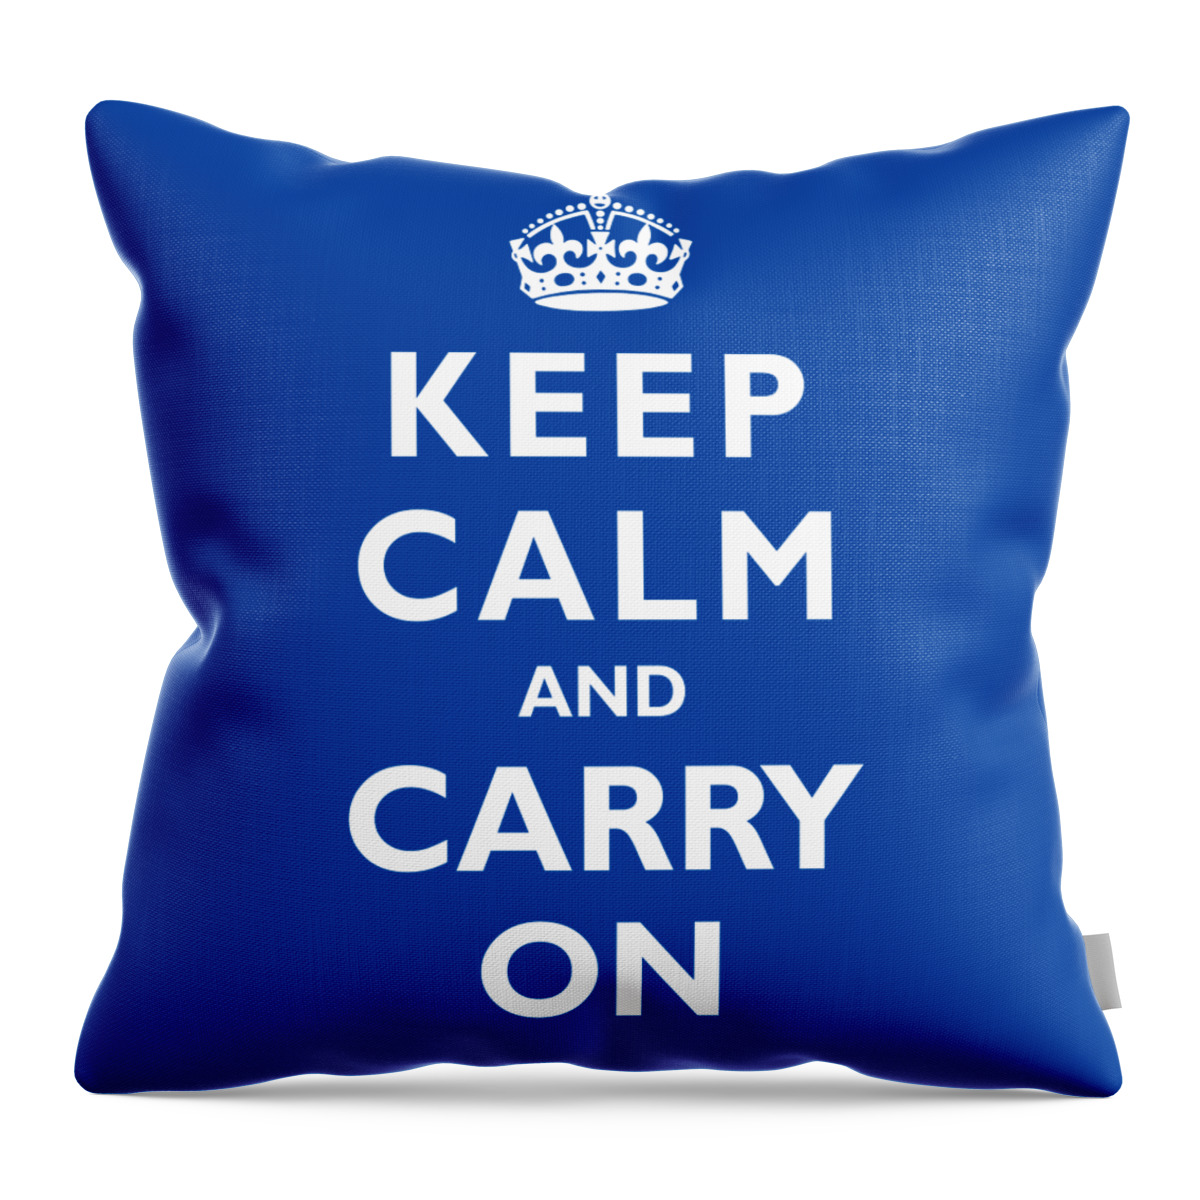 Keep Calm And Carry On Throw Pillow featuring the photograph Keep Calm Blue by Mark Rogan